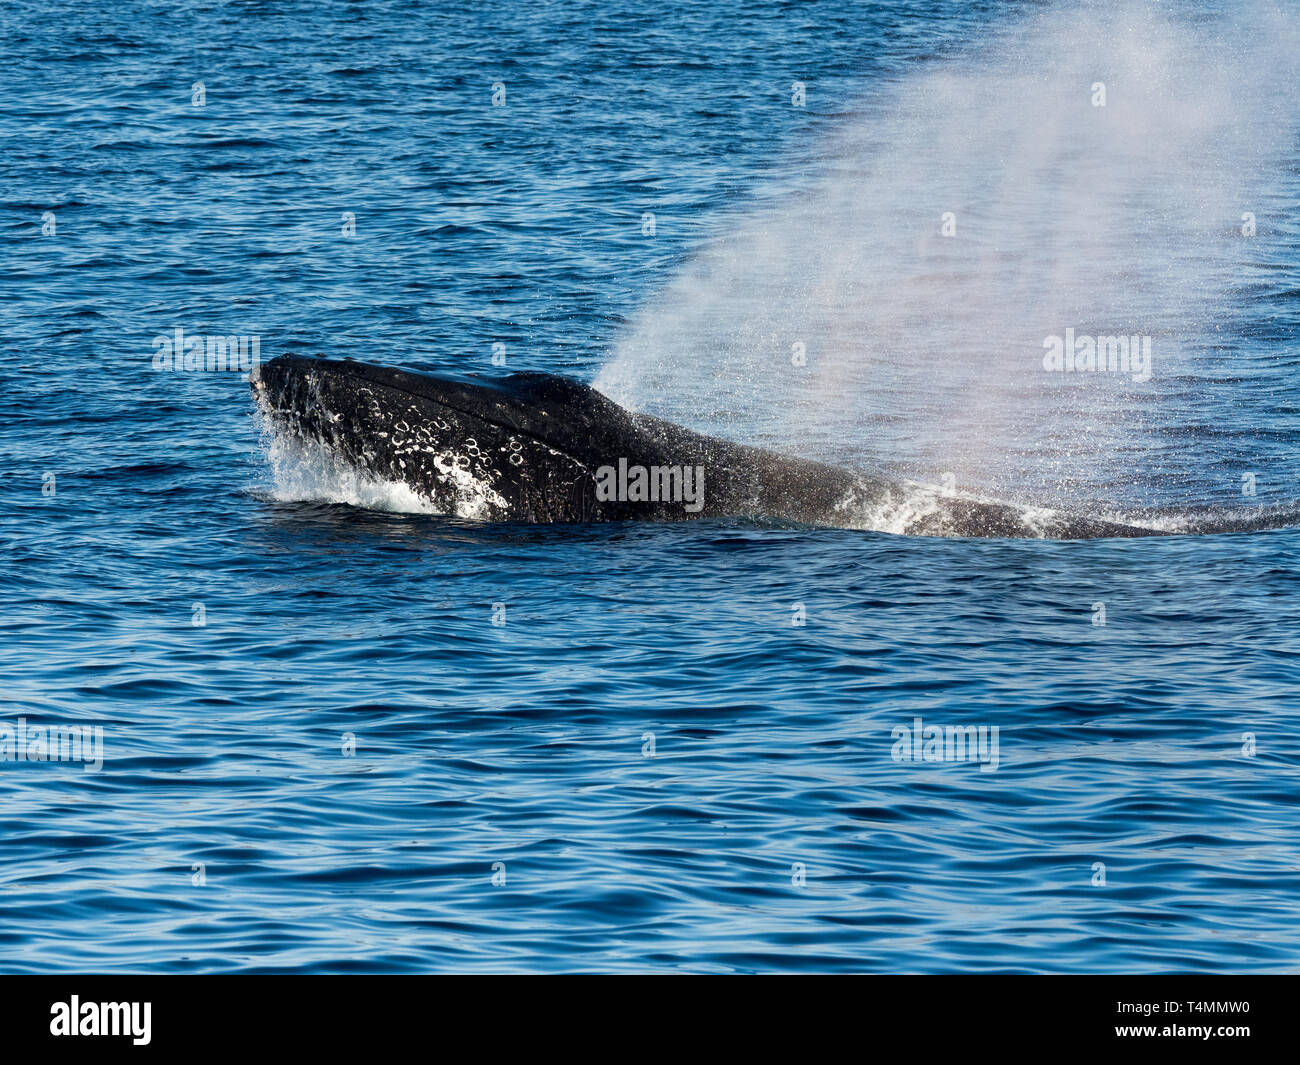 An aggressive humpback whale charges at the surface off of San Jose del Cabo, Baja California Sur, Mexico Stock Photo